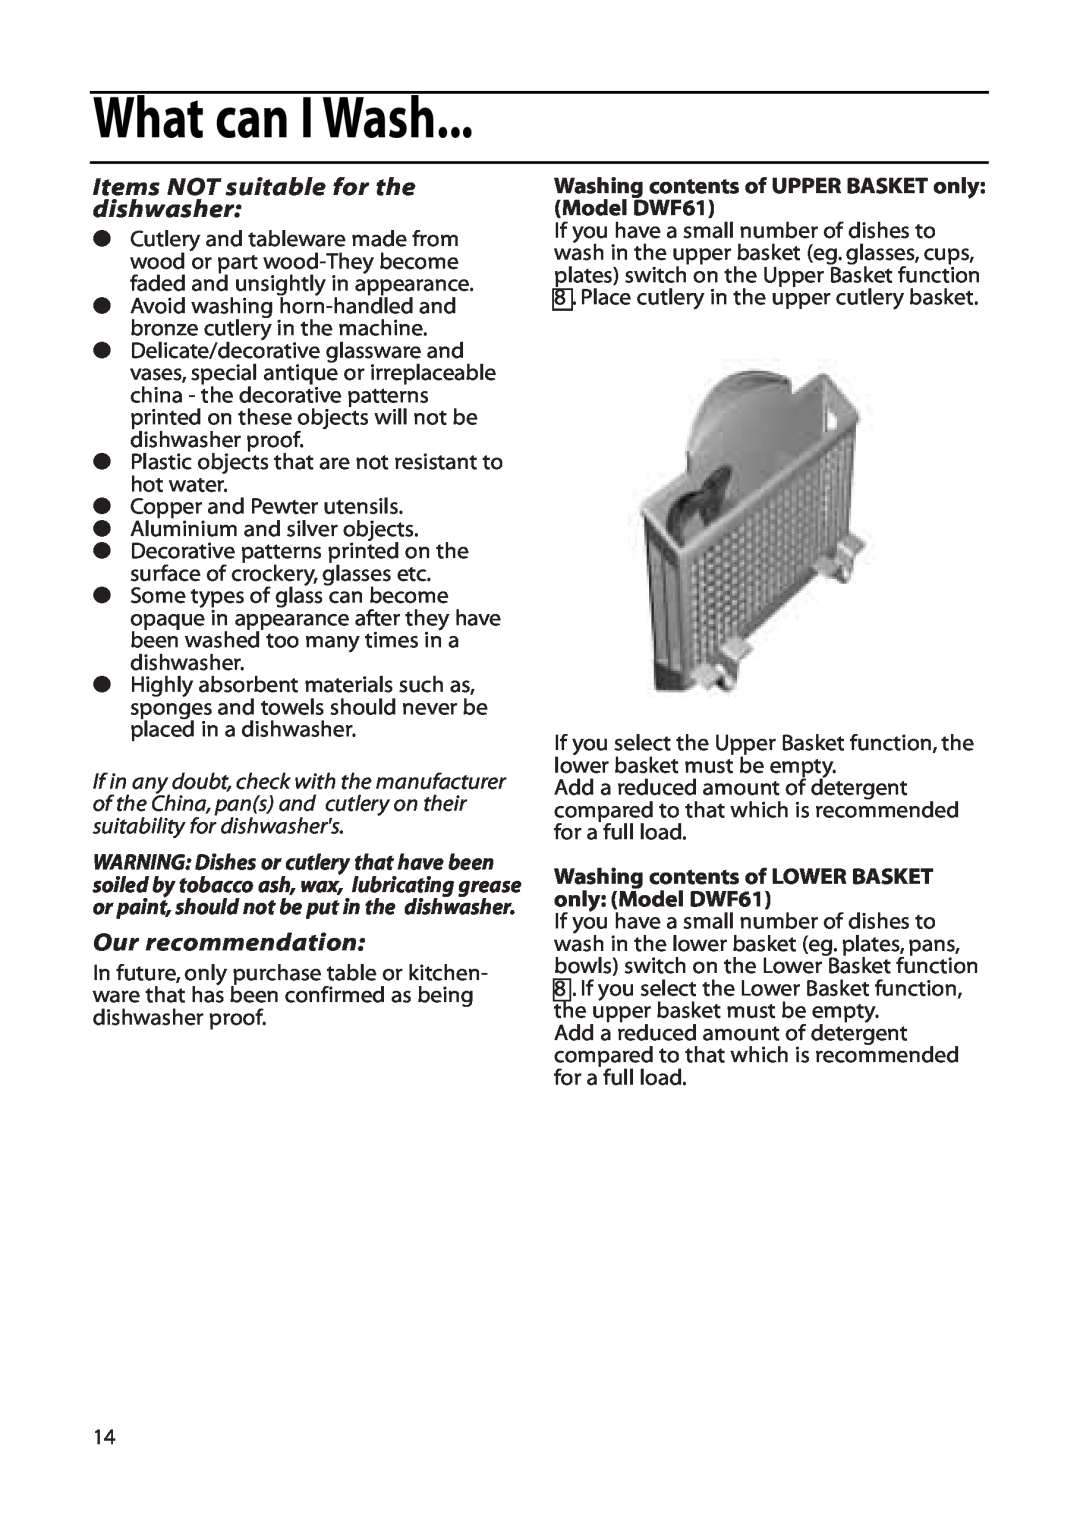 Hotpoint DWF61, DWF60 installation instructions What can I Wash, Items NOT suitable for the dishwasher, Our recommendation 